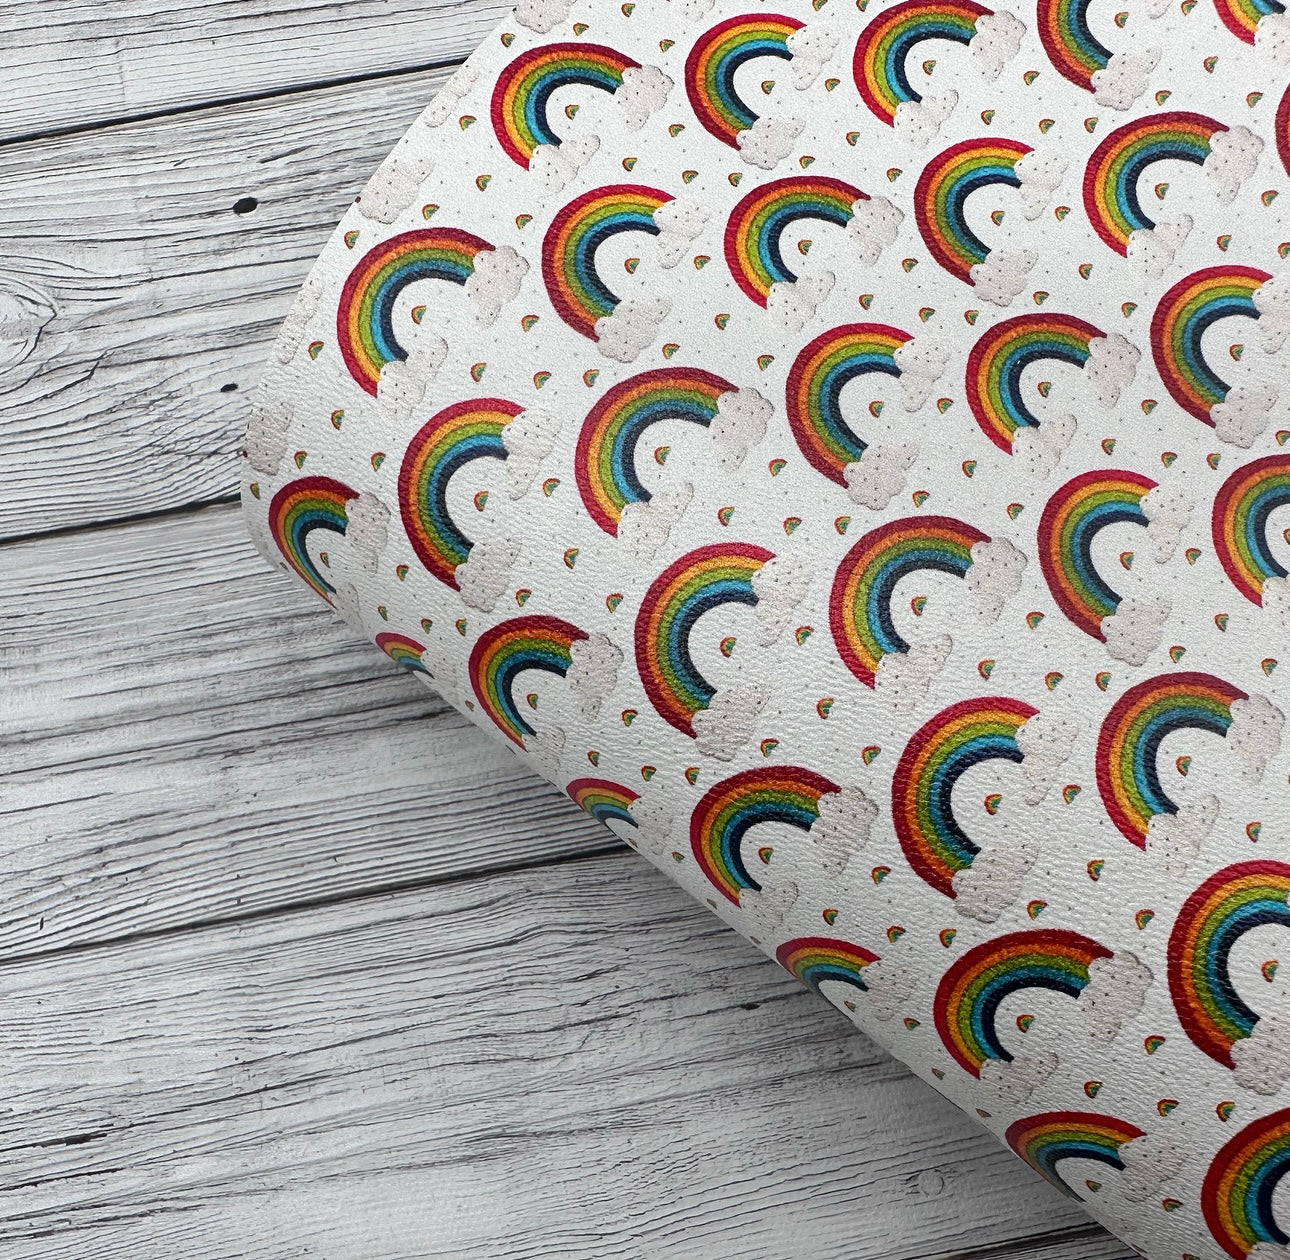 Embroidered Rainbow Premium Faux Leather Fabric Sheets